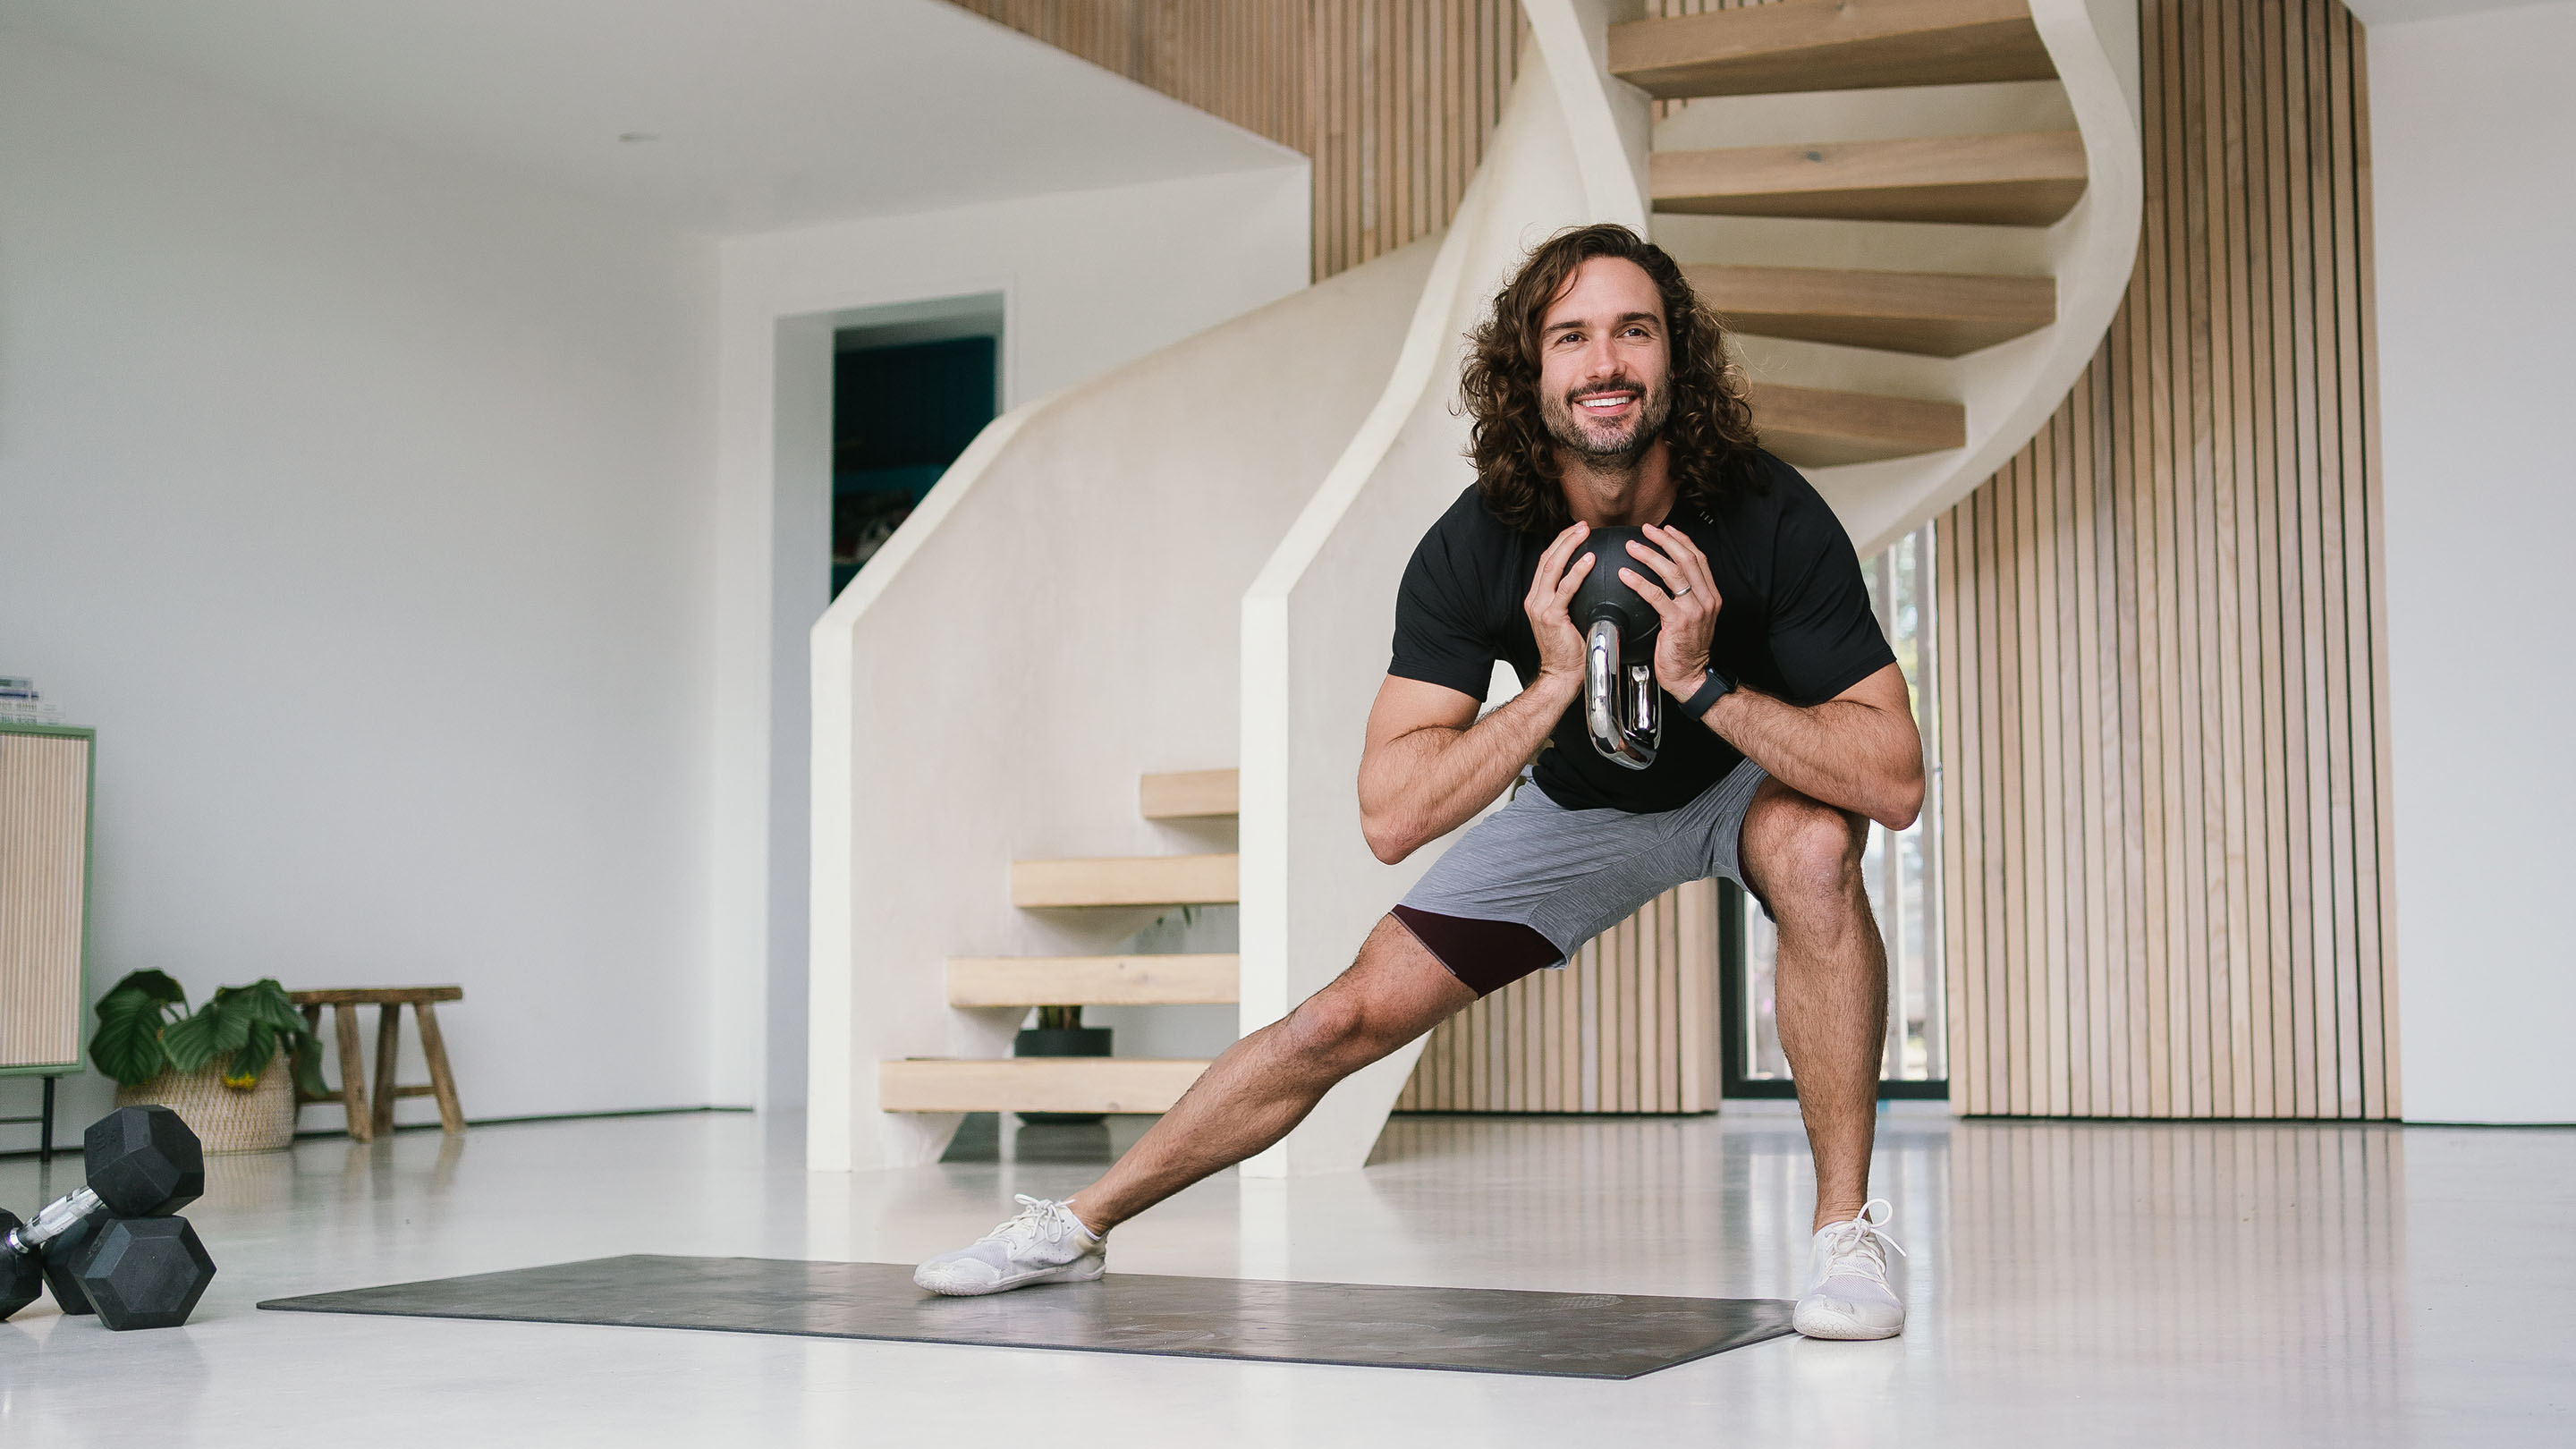 Joe Wicks exercising with a kettlebell in a modern looking room